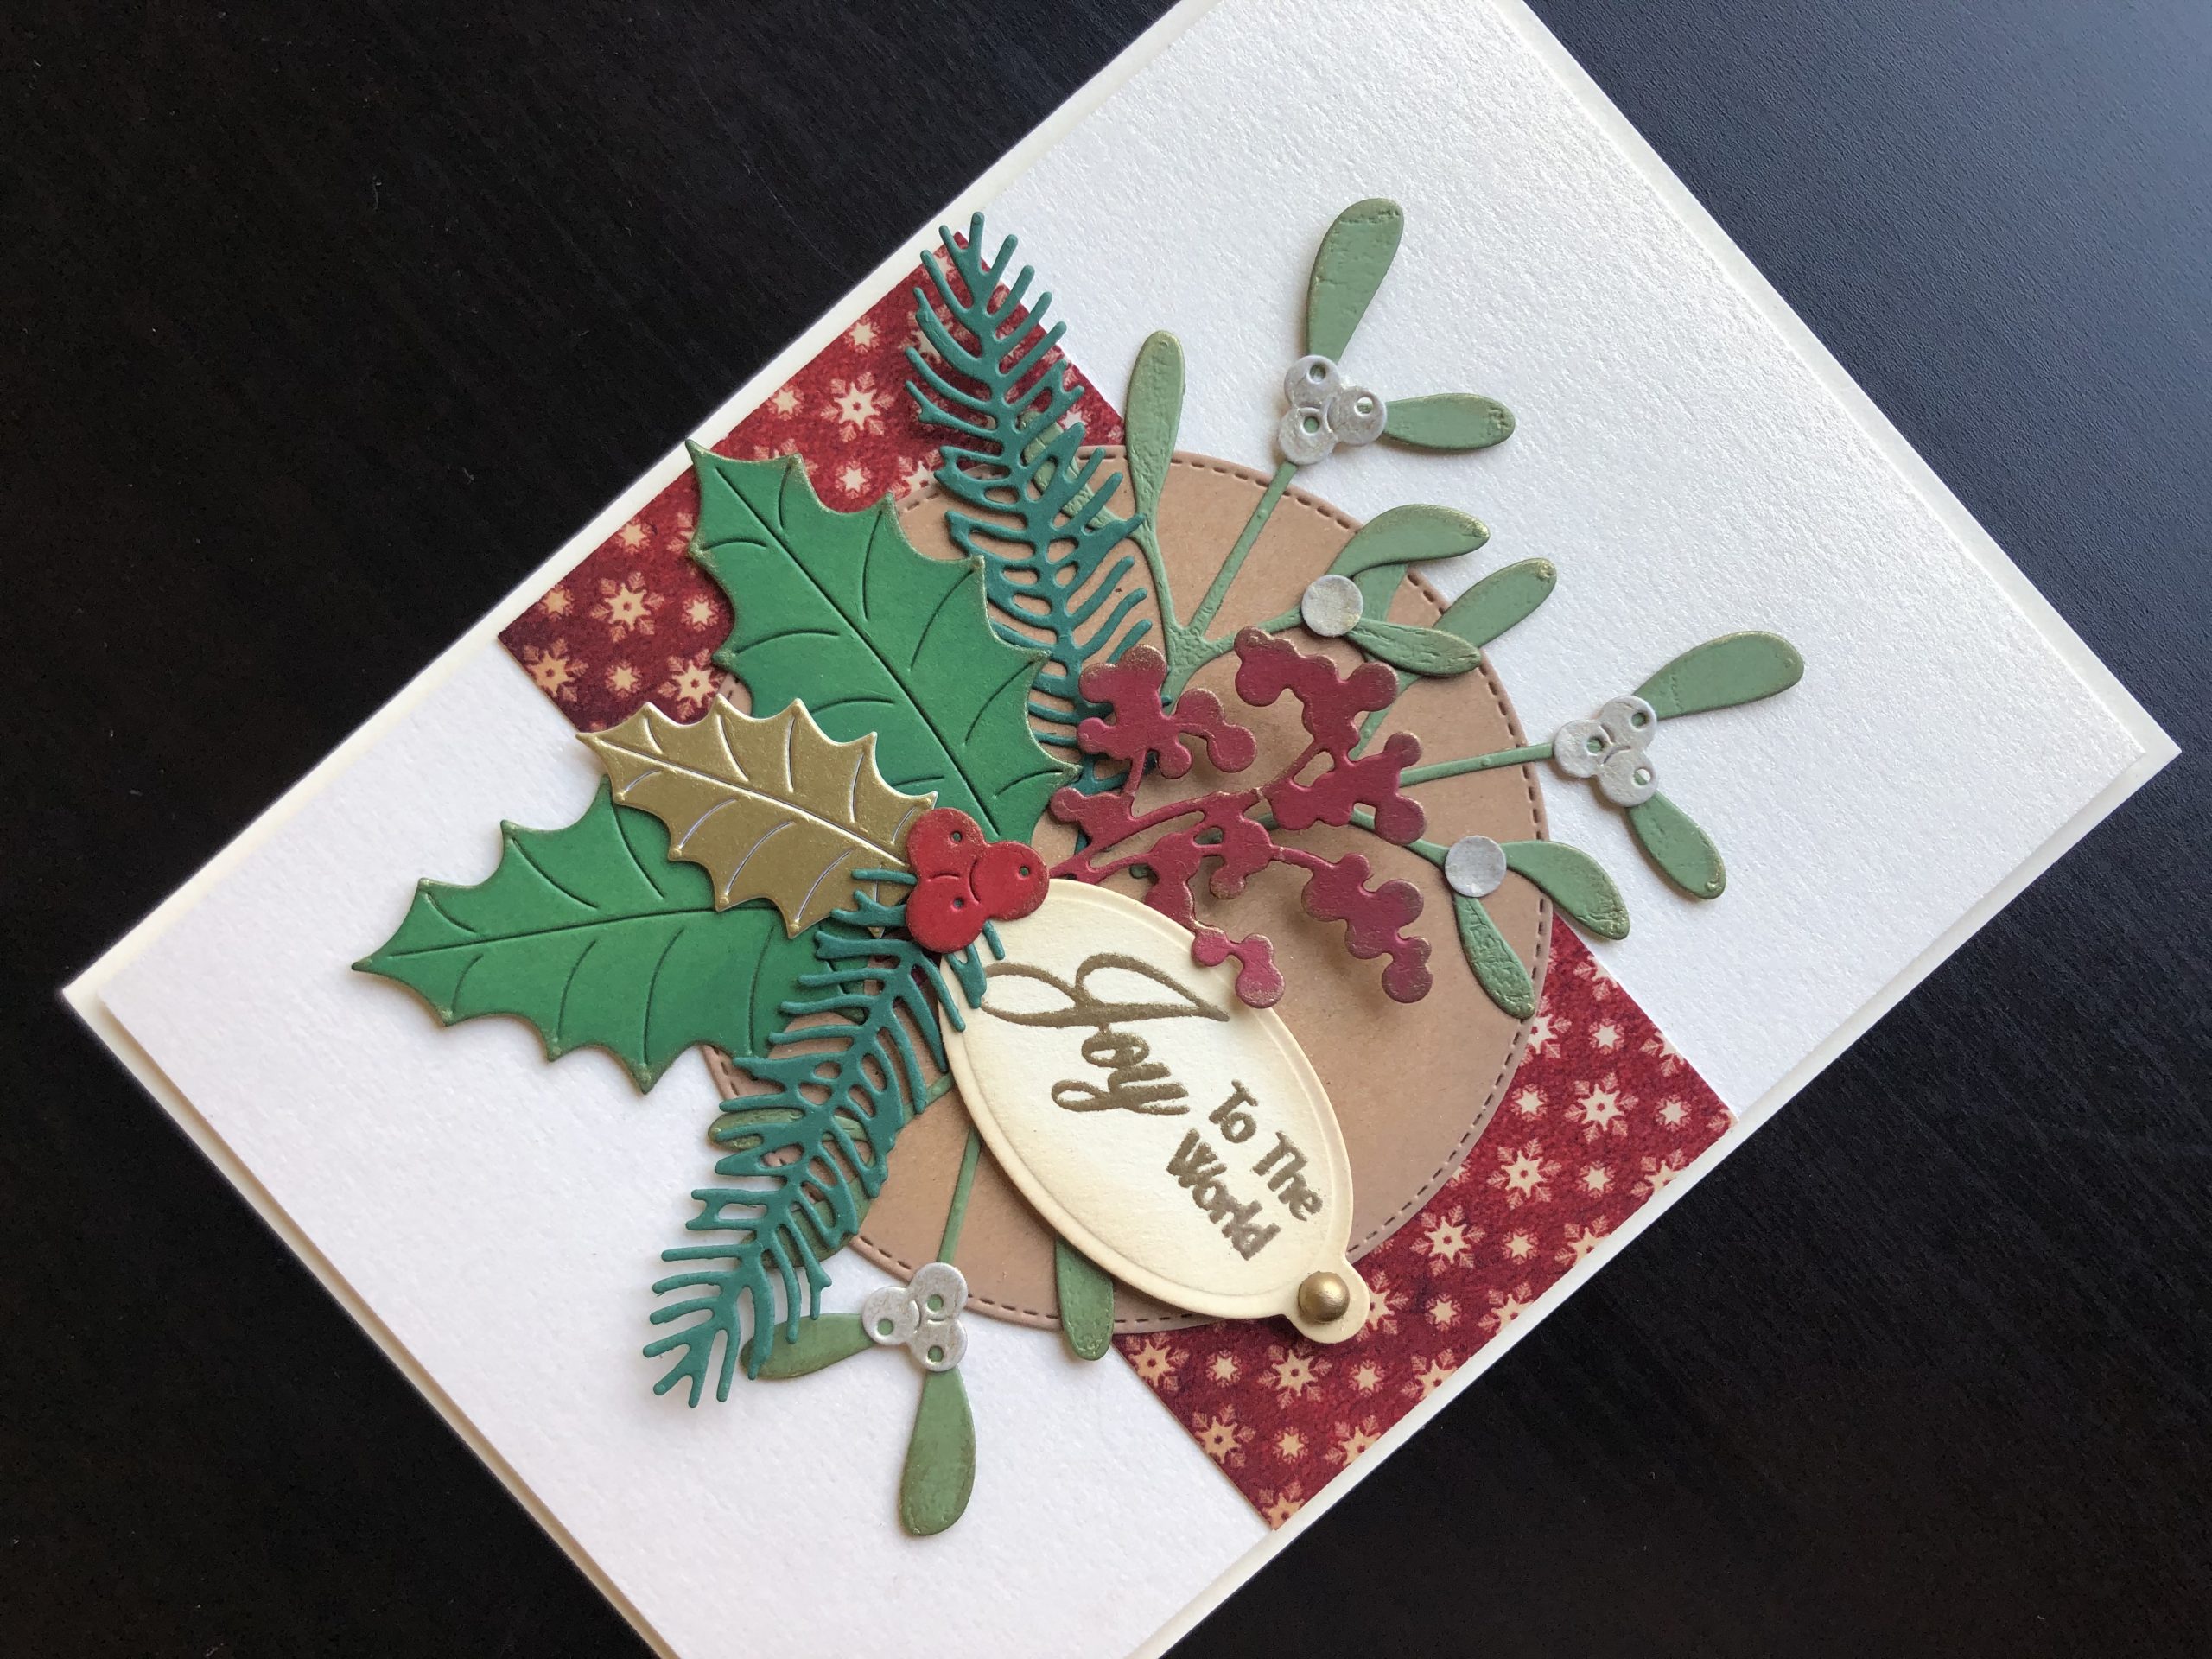 Hand made Christmas card with die cut winter foliage